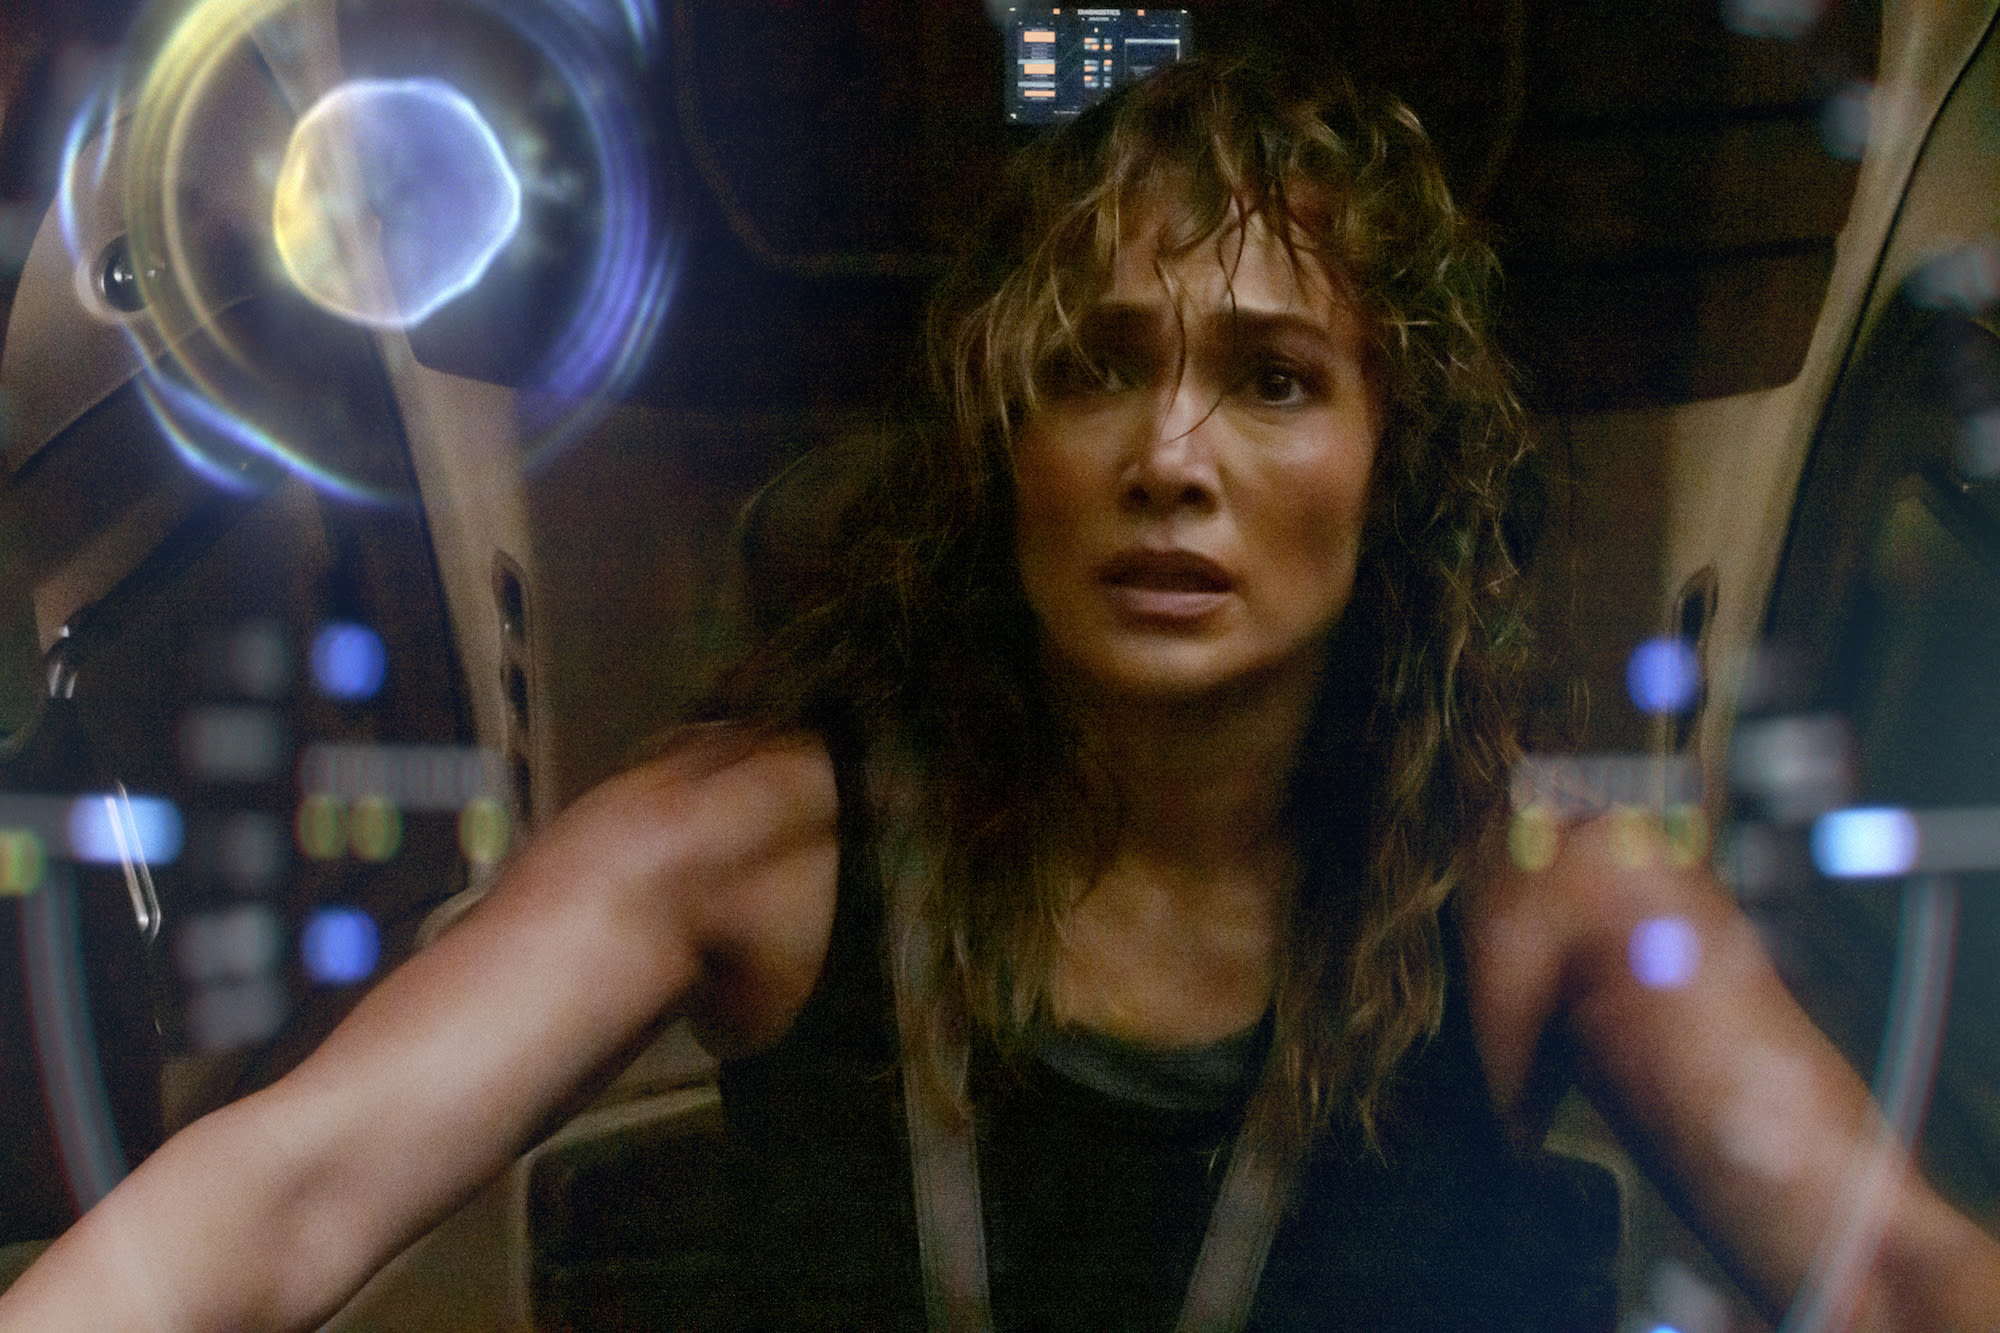 Jennifer Lopez enters the war against AI in a new video for Netflix’s Atlas